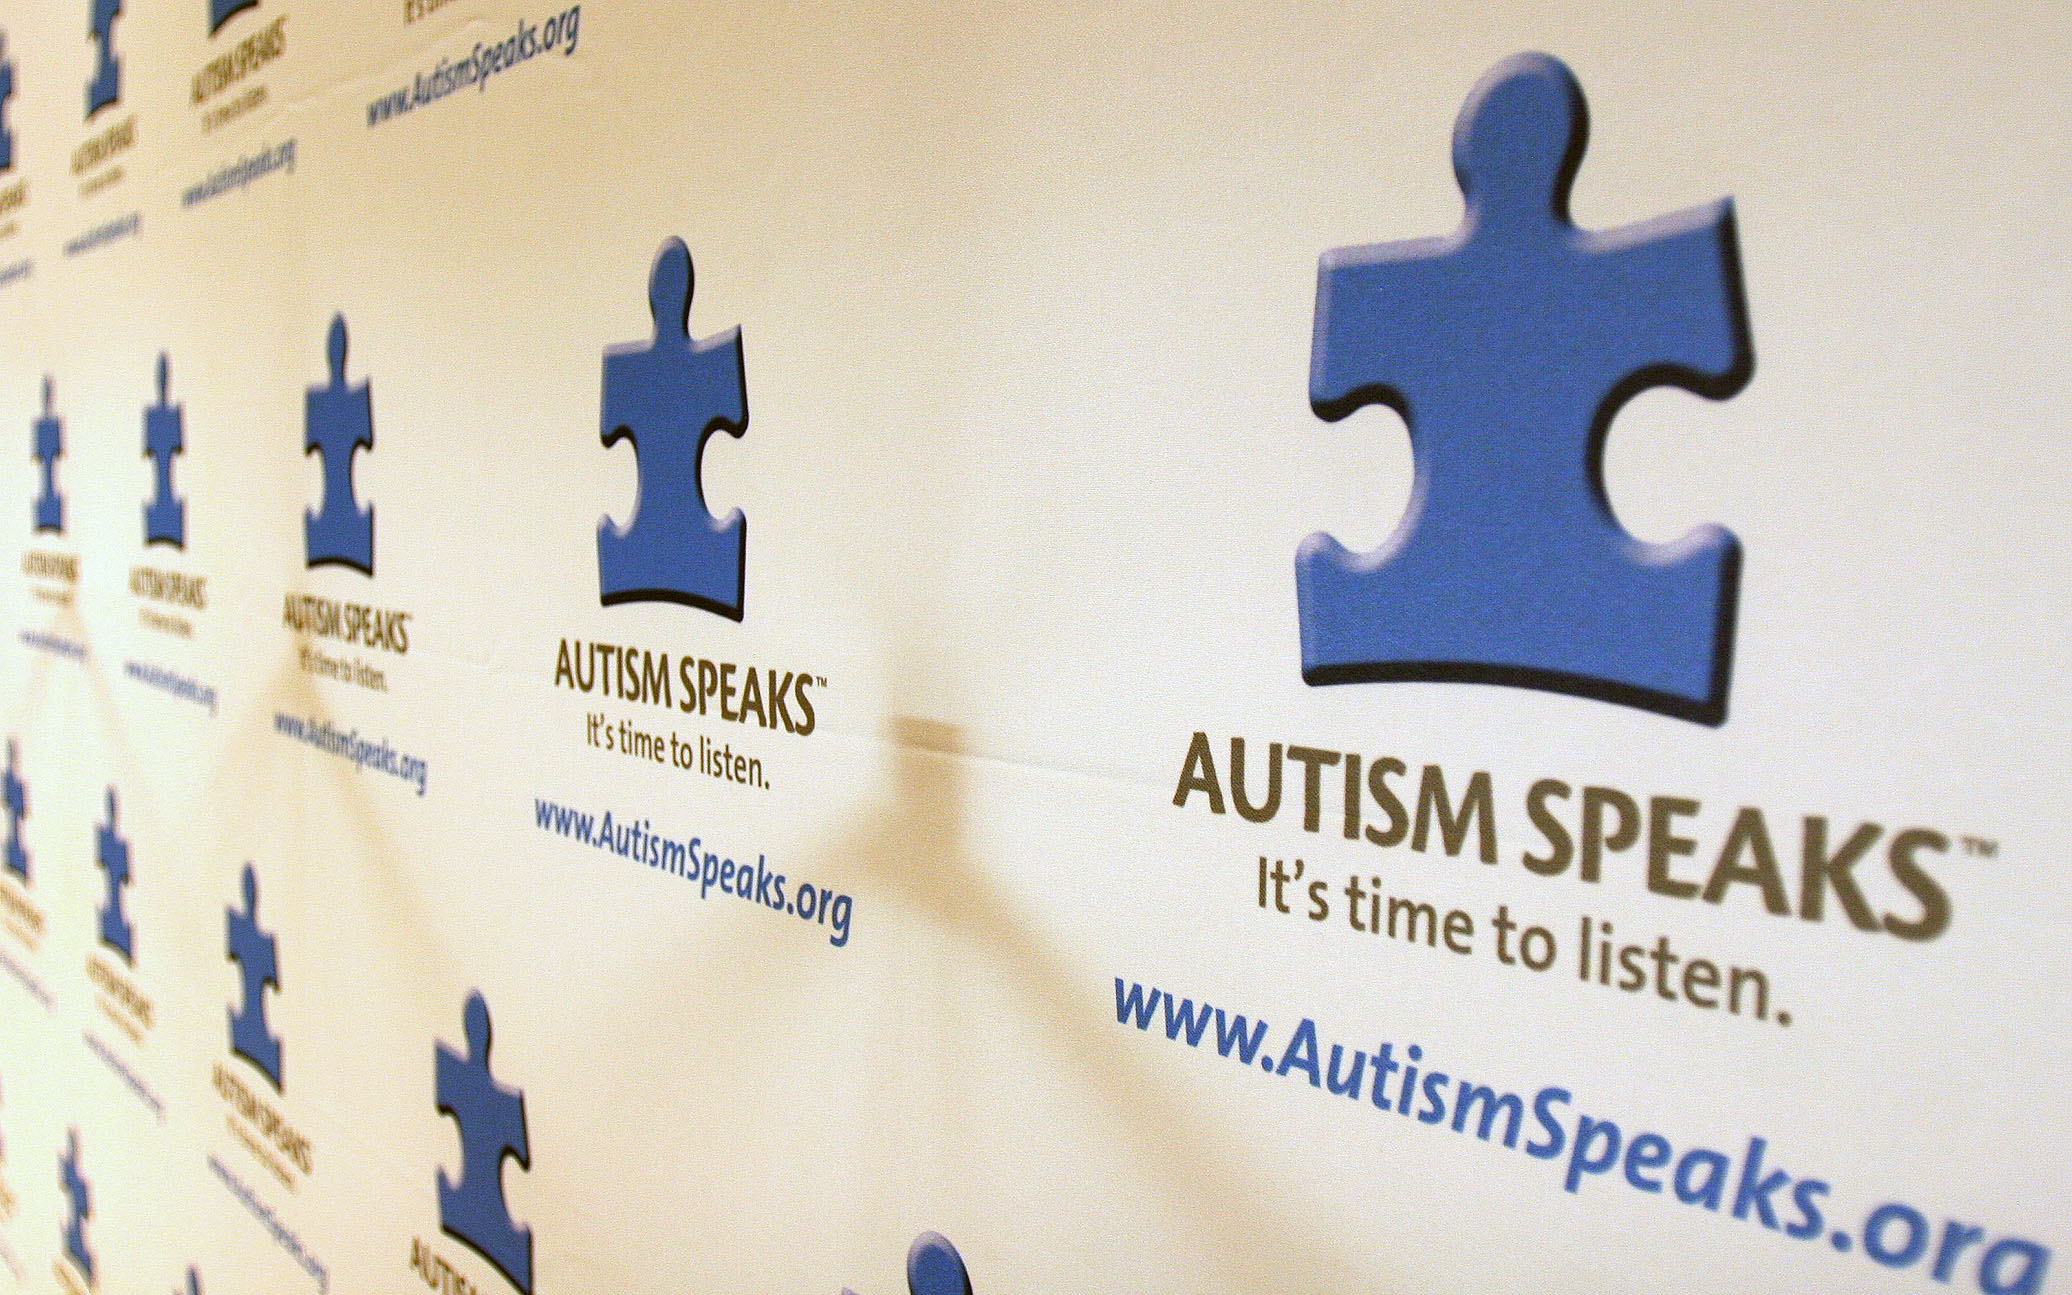 Autism Speaks opposes ruling allowing electric shock therapy